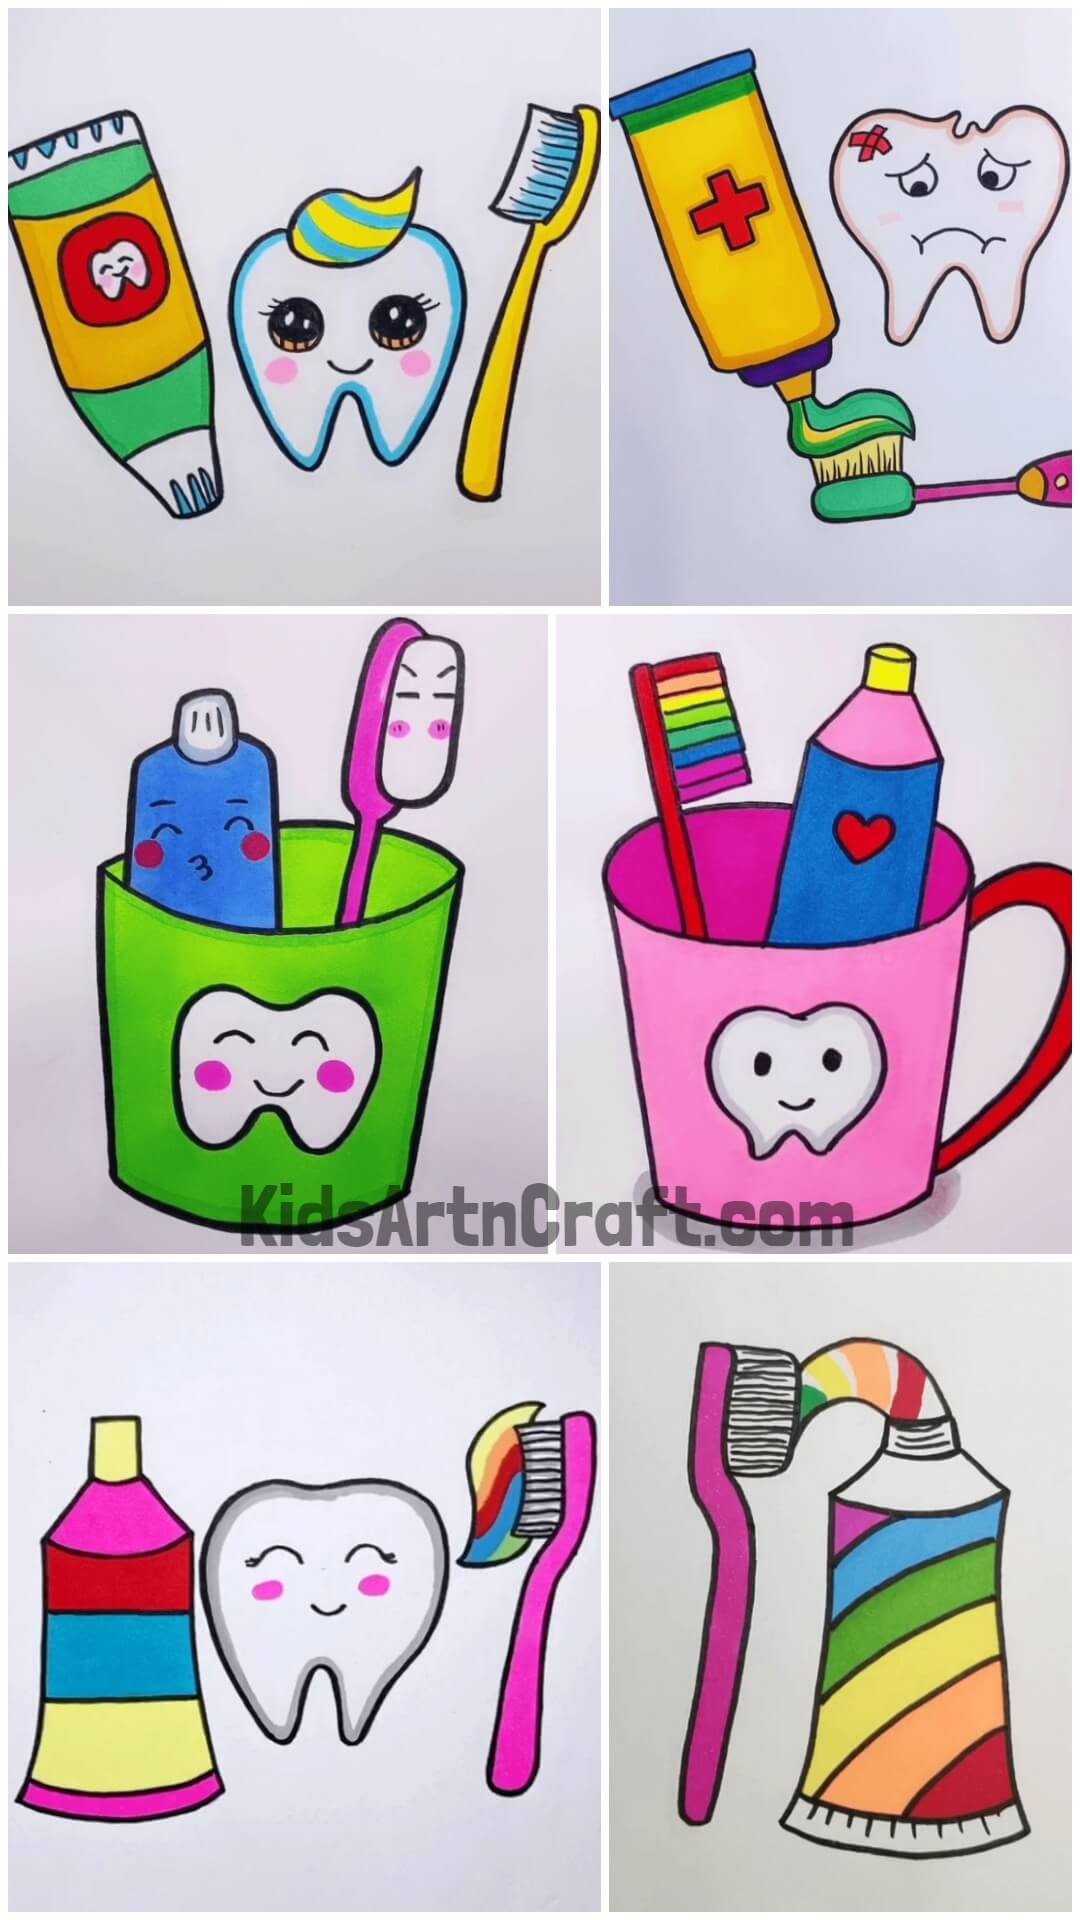 Toothpaste & Brush Drawings for Kids